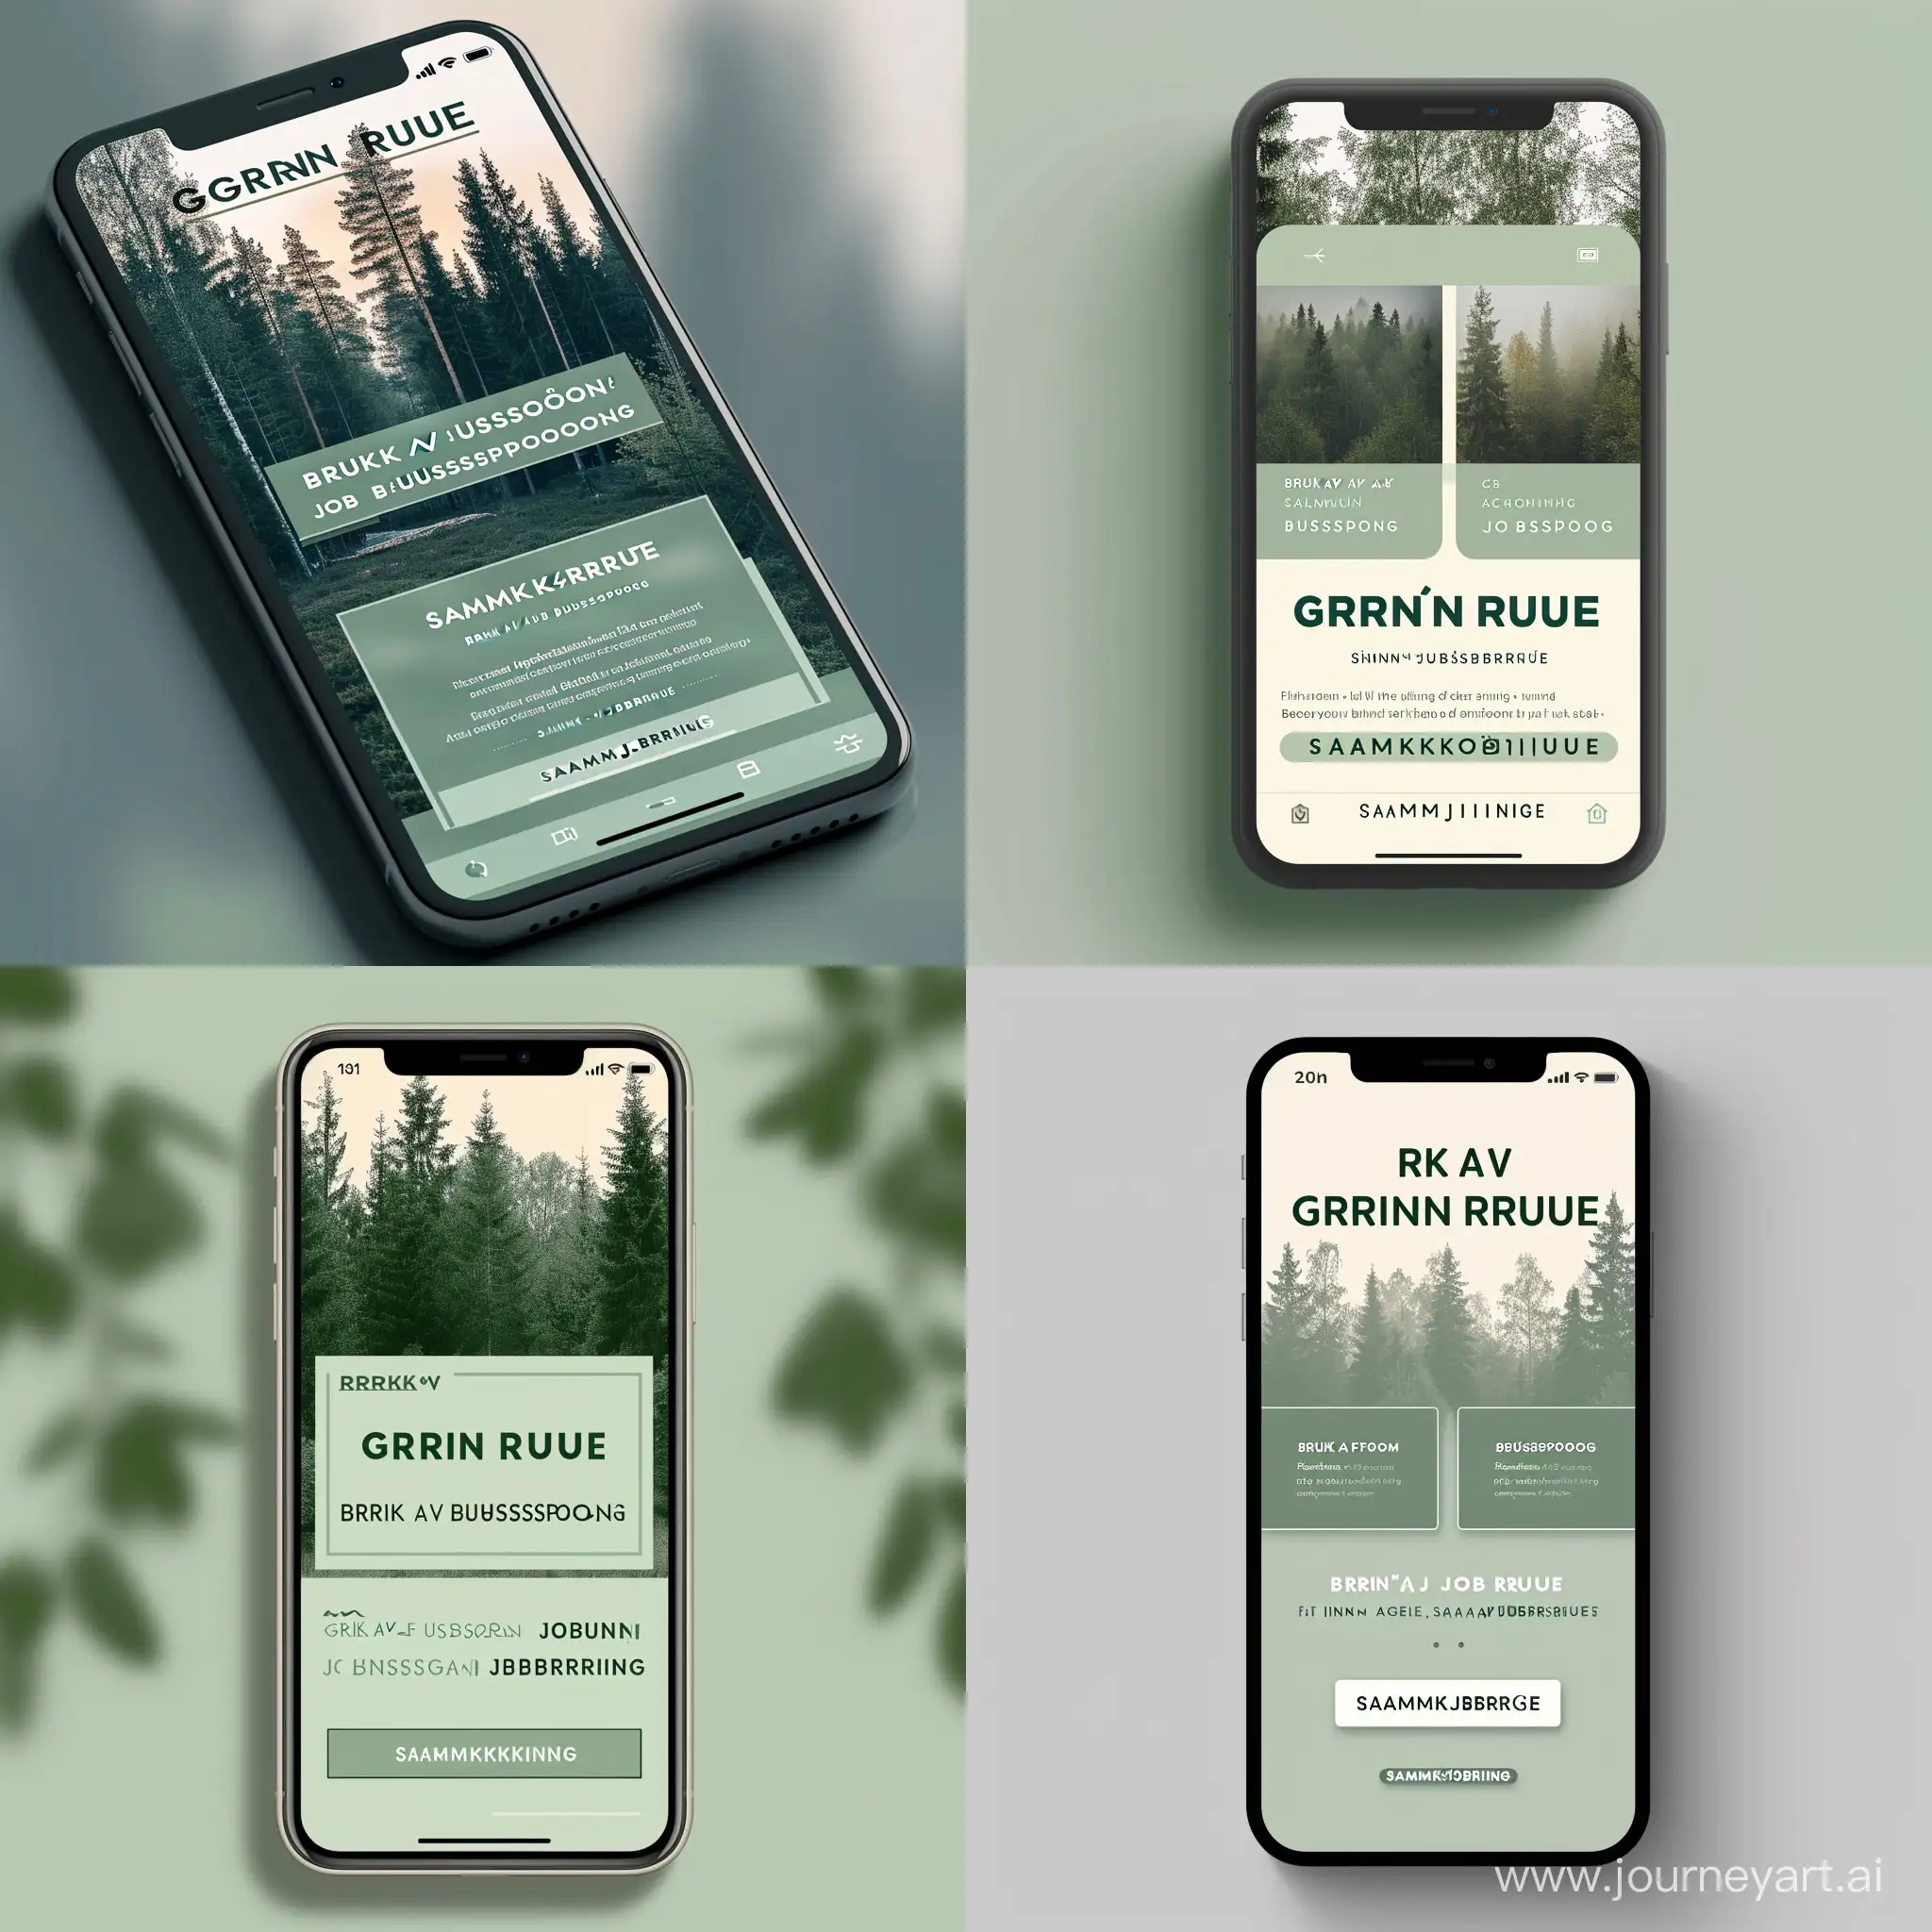 Make a phone screen with the topic "GRØNN RUTE". The background should be trees. Under the topic make two light green boxes with the same size. In the topp box write "BRUK AV BUSSPOENG".  And in the lowest boxs write "FINN GRØNN JOBBRUTE". Under this tekst write in smaller letters "SAMMKJØRING". 